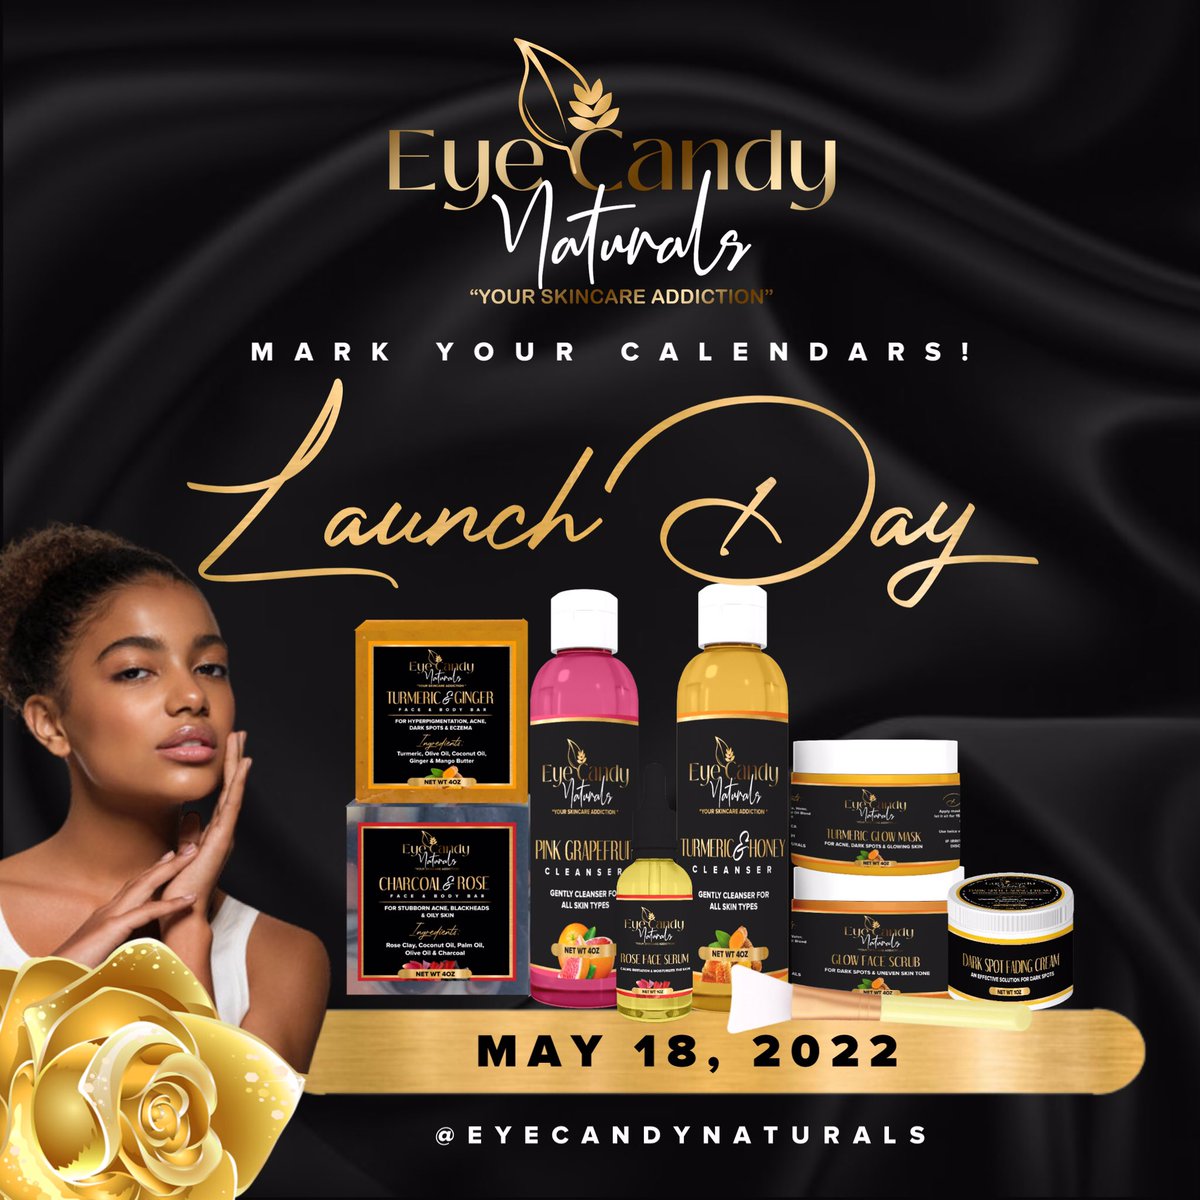 WE ARE OFFICIALLY LAUNCHING TOMORROW 🚀 

#supportsmallbusiness #highestquality  #scrubs #bodyscubs #comingsoon #skincare #skincareroutine #skincareproducts #skincaretips #skincarejunkie #organic #natural #cleanskin #flawlessskin #yourskincaresolution #yourskincareaddiction